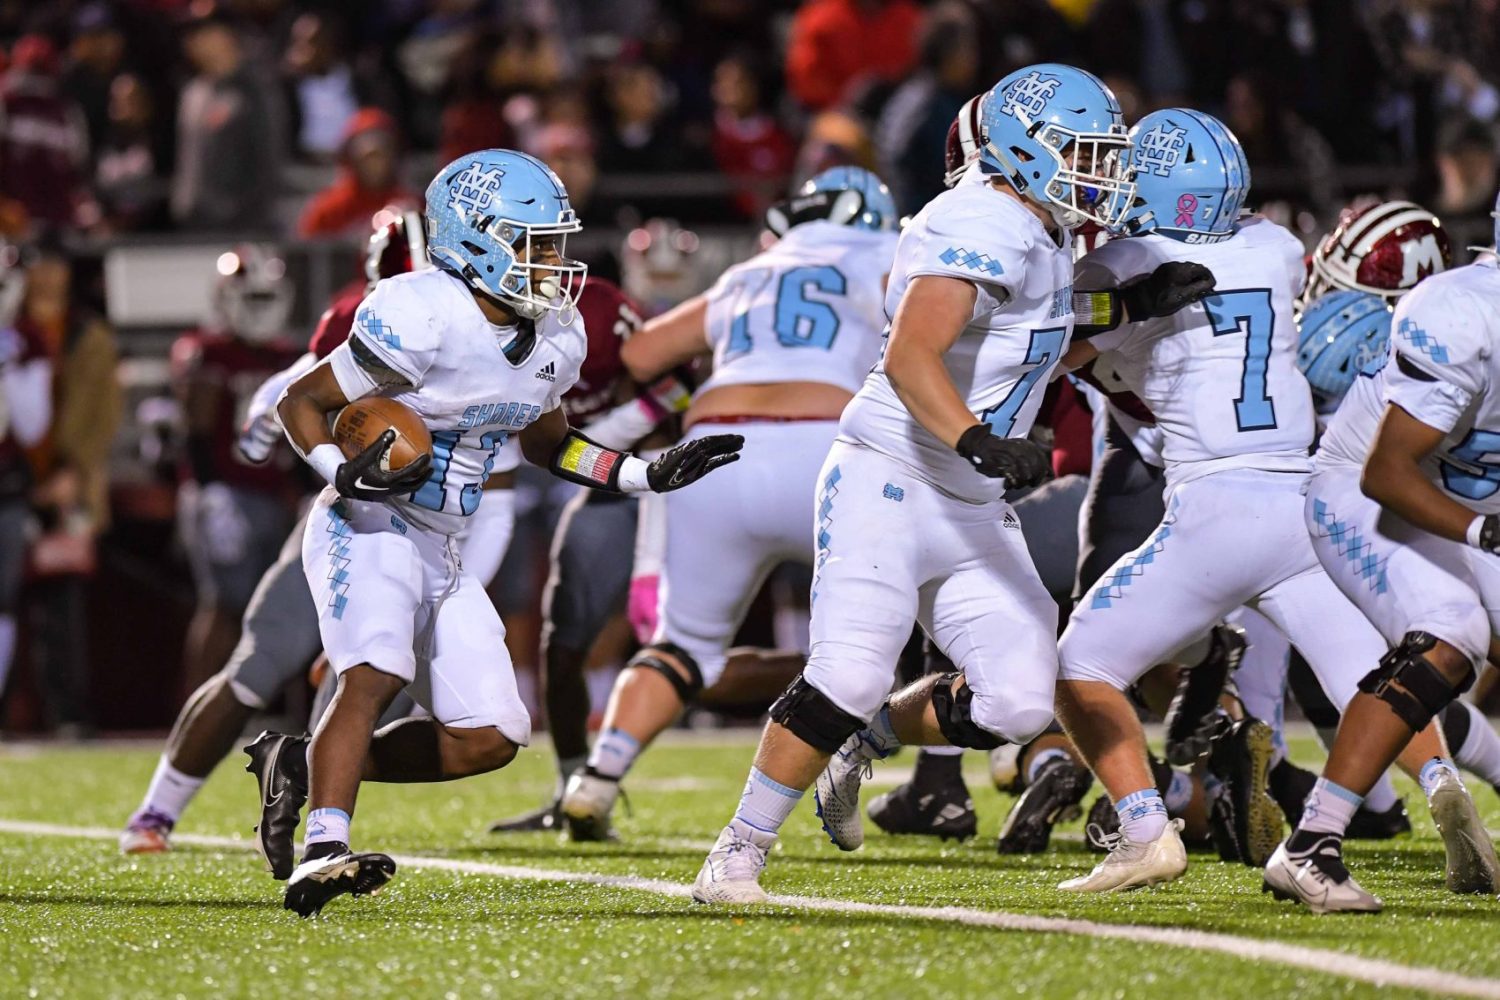 Prep football playoffs feature 14 area teams; all games set for 7 p.m. Friday